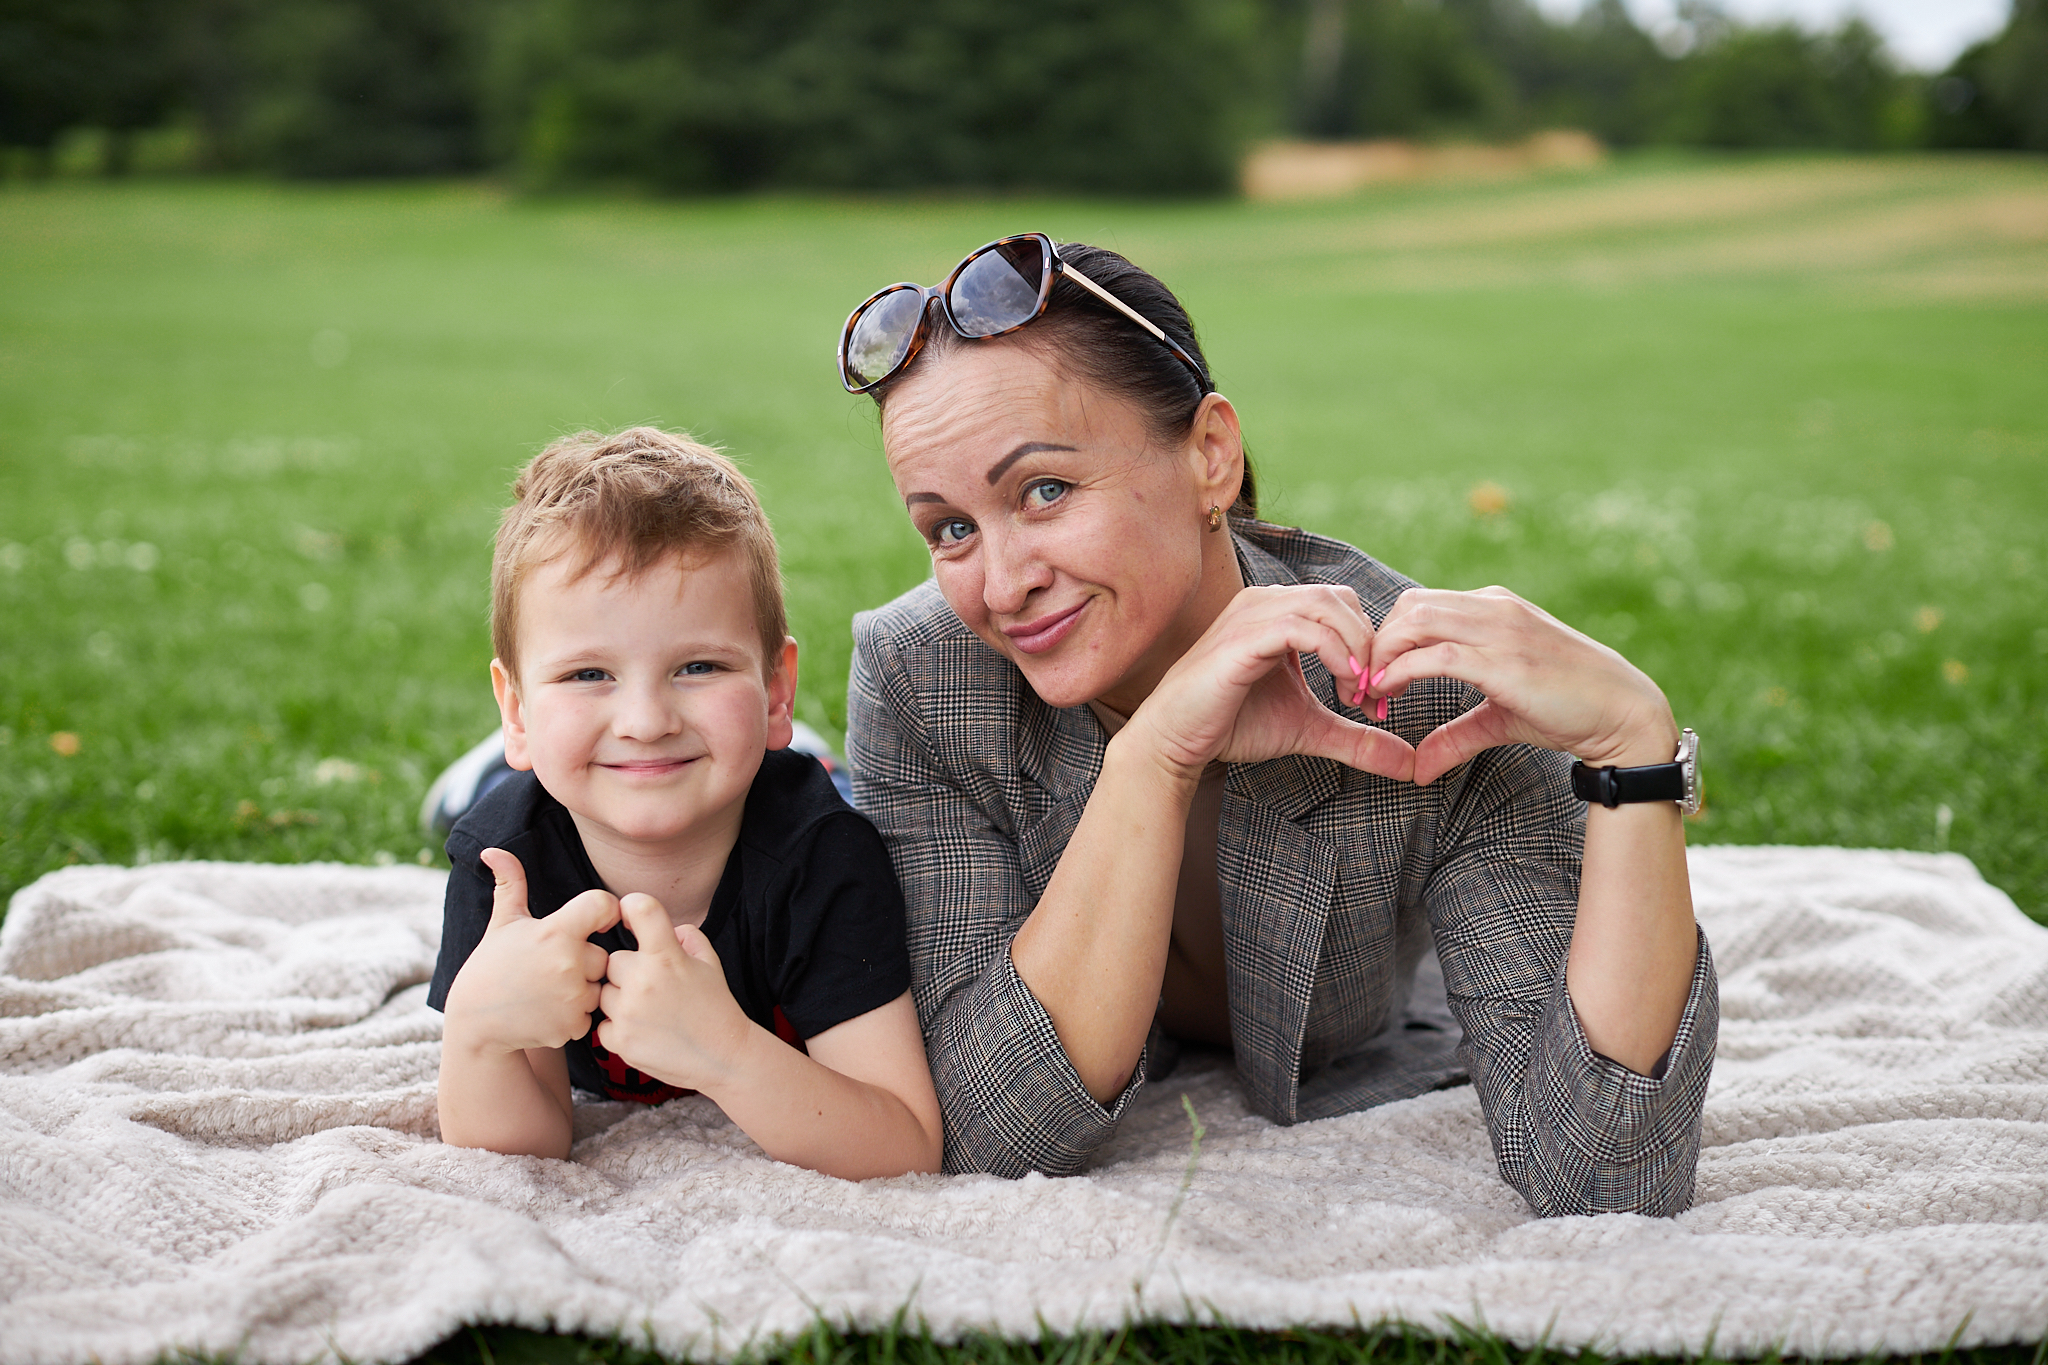 A mum and her son posing for a photo. The mum is creating a heart with her hands and her son has his thumbs up